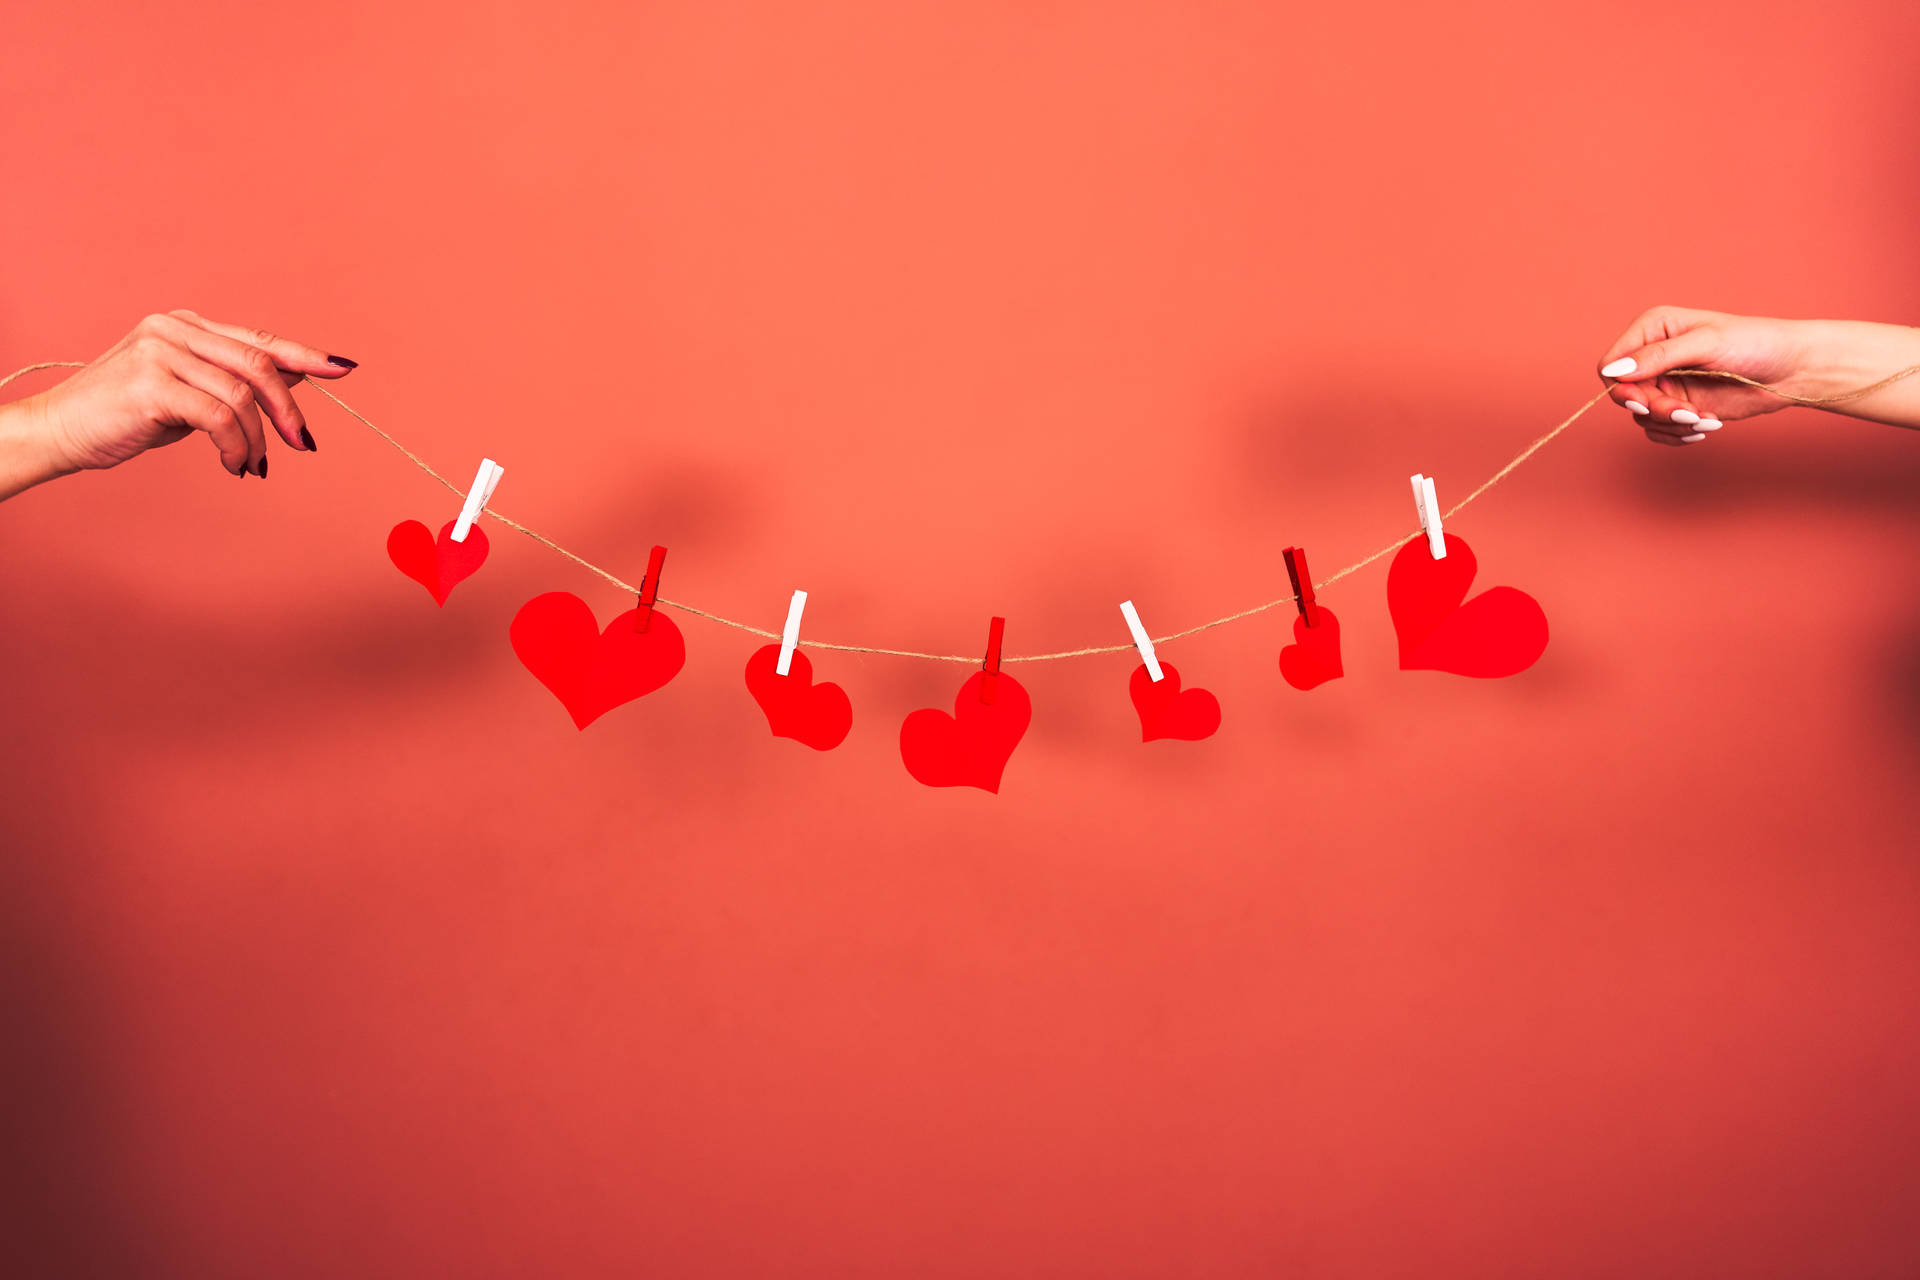 Aesthetic Heart Shapes On A String Wallpaper